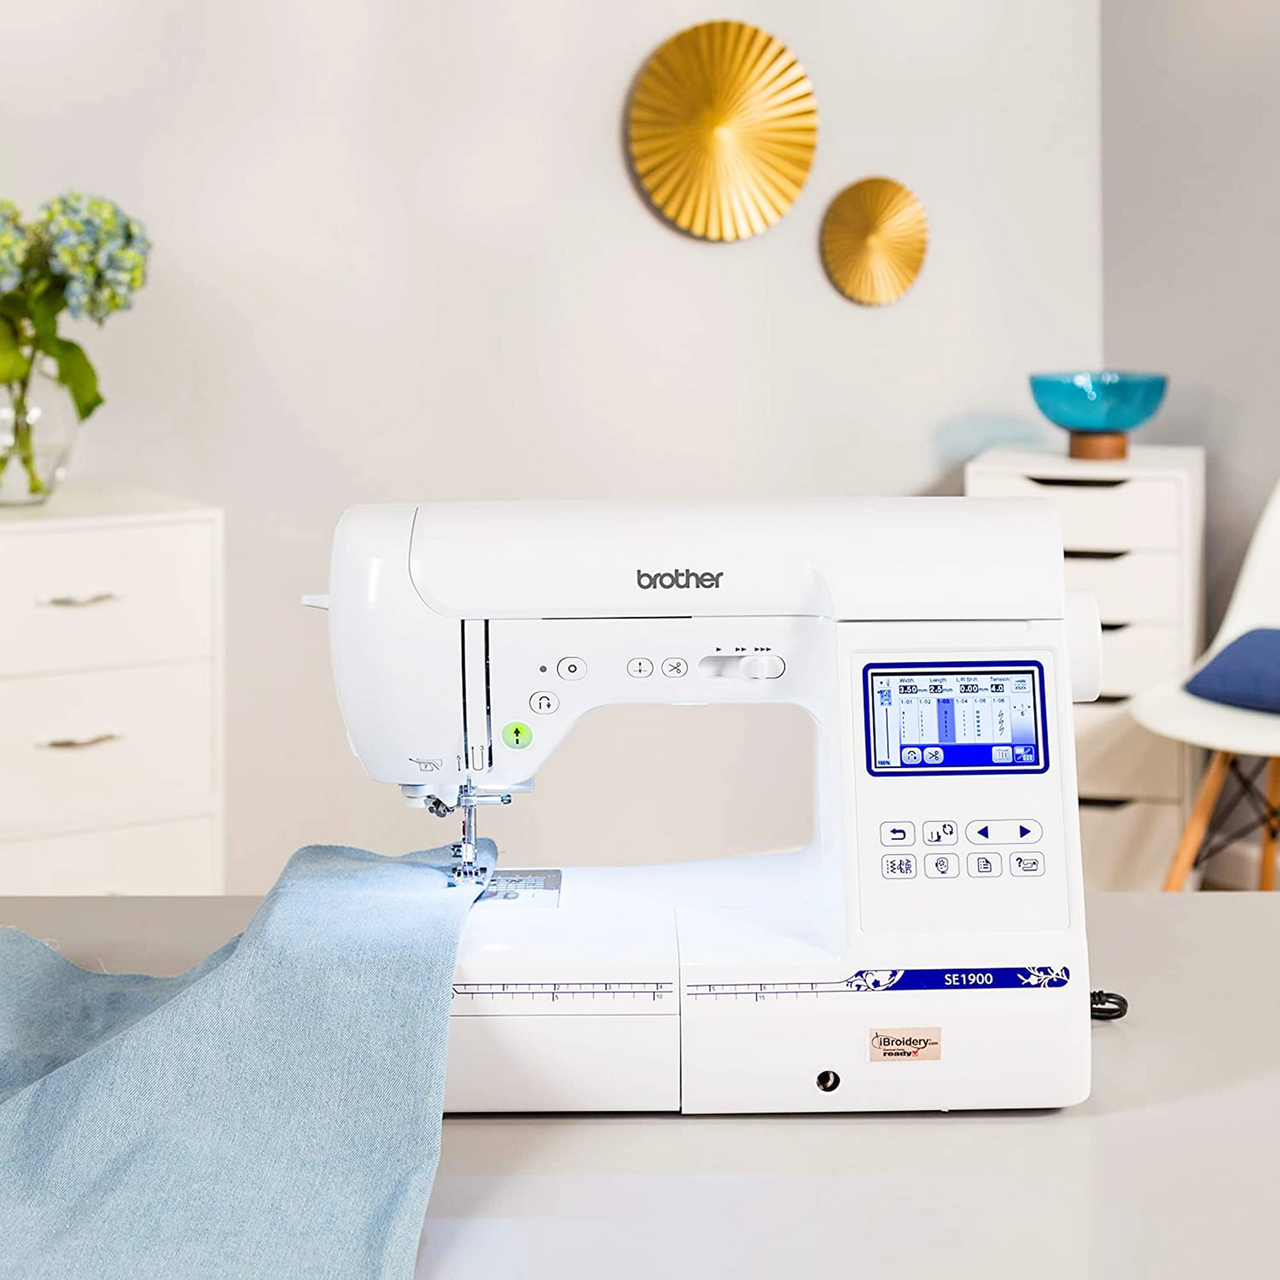 Brother se1900 sewing embroidery machine